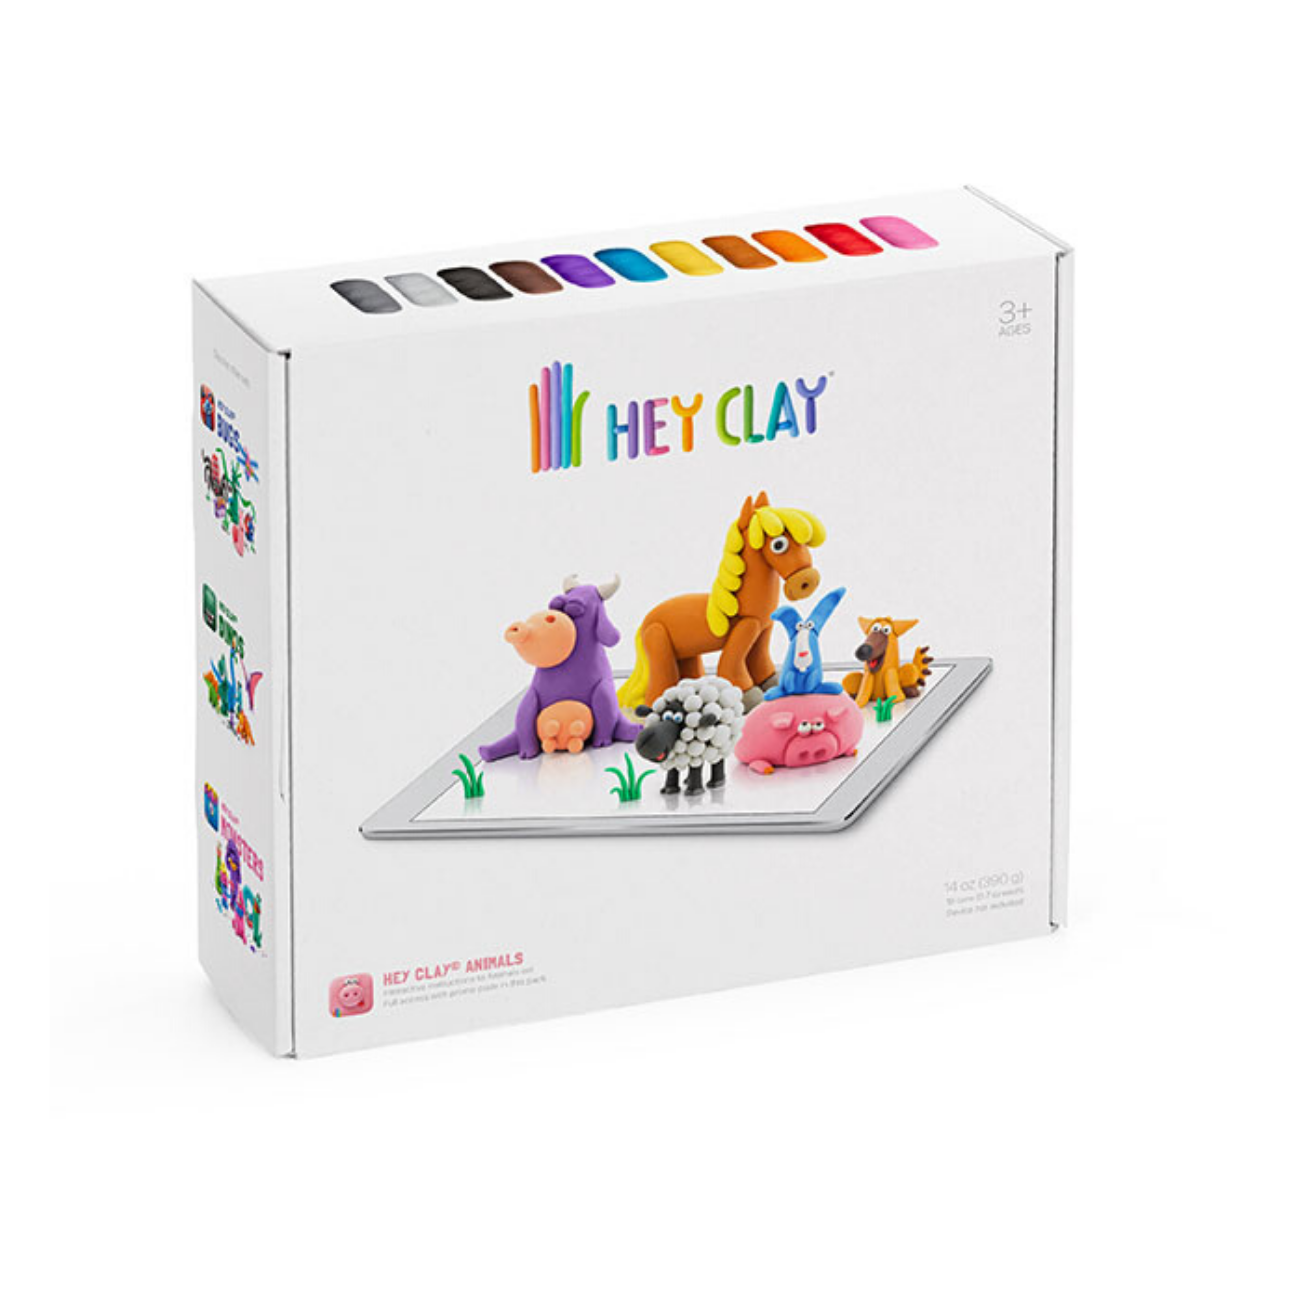 Hey Clay Sets – Child's Play